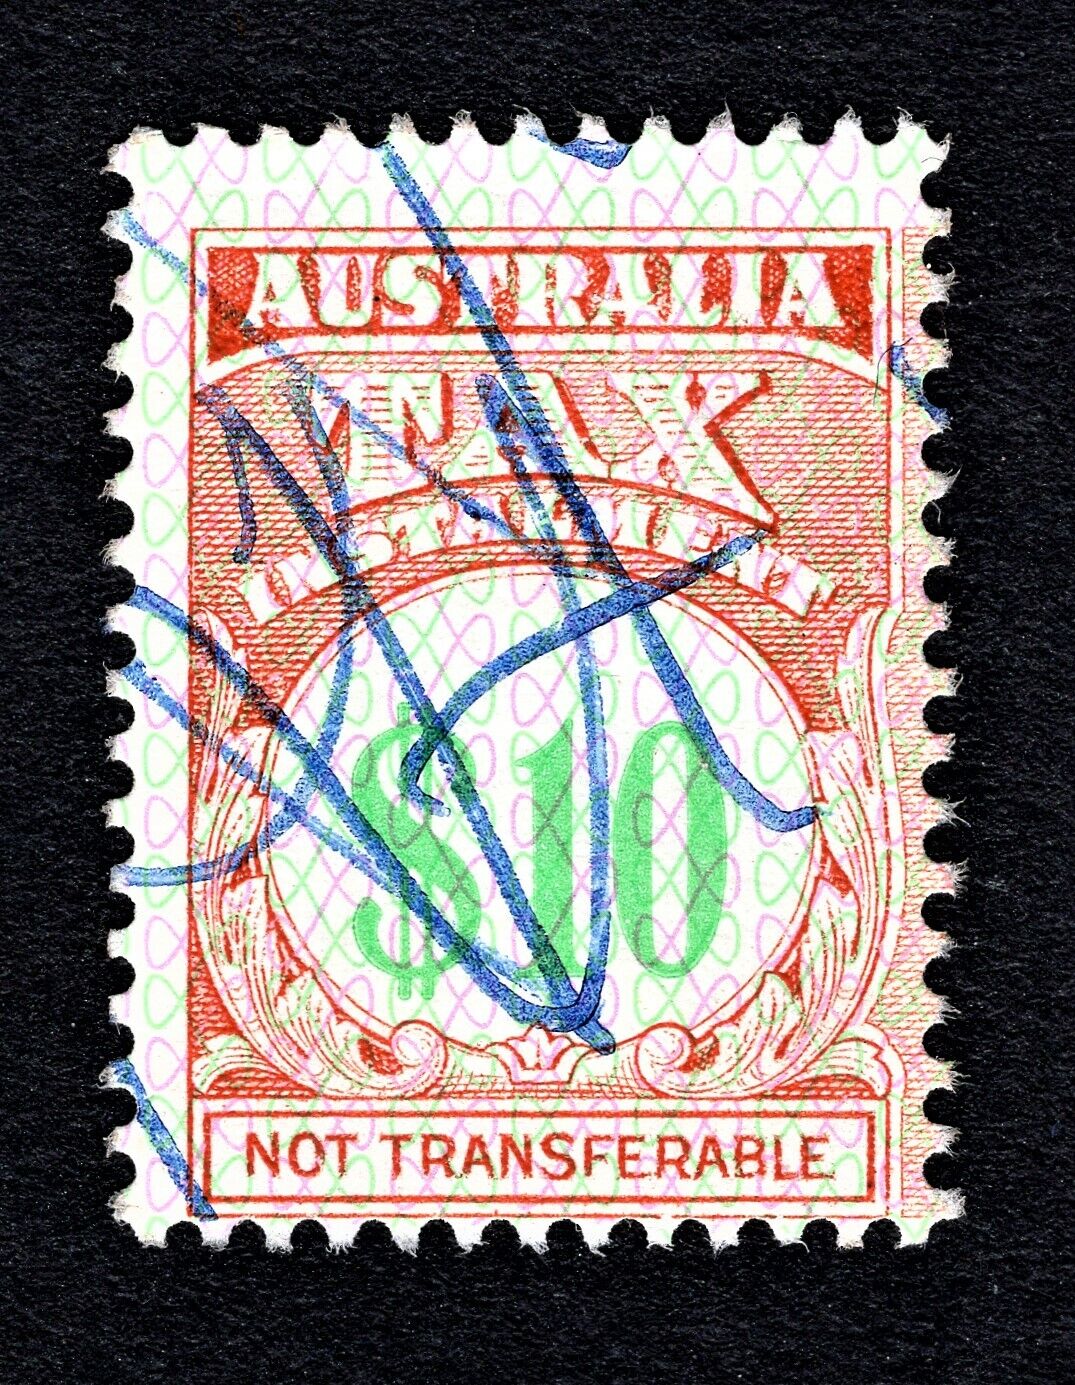 AUSTRALIA REVENUE FISCAL TAX INSTALMENT Gifts $10 2021new shipping free STAMP GREEN FROM RED